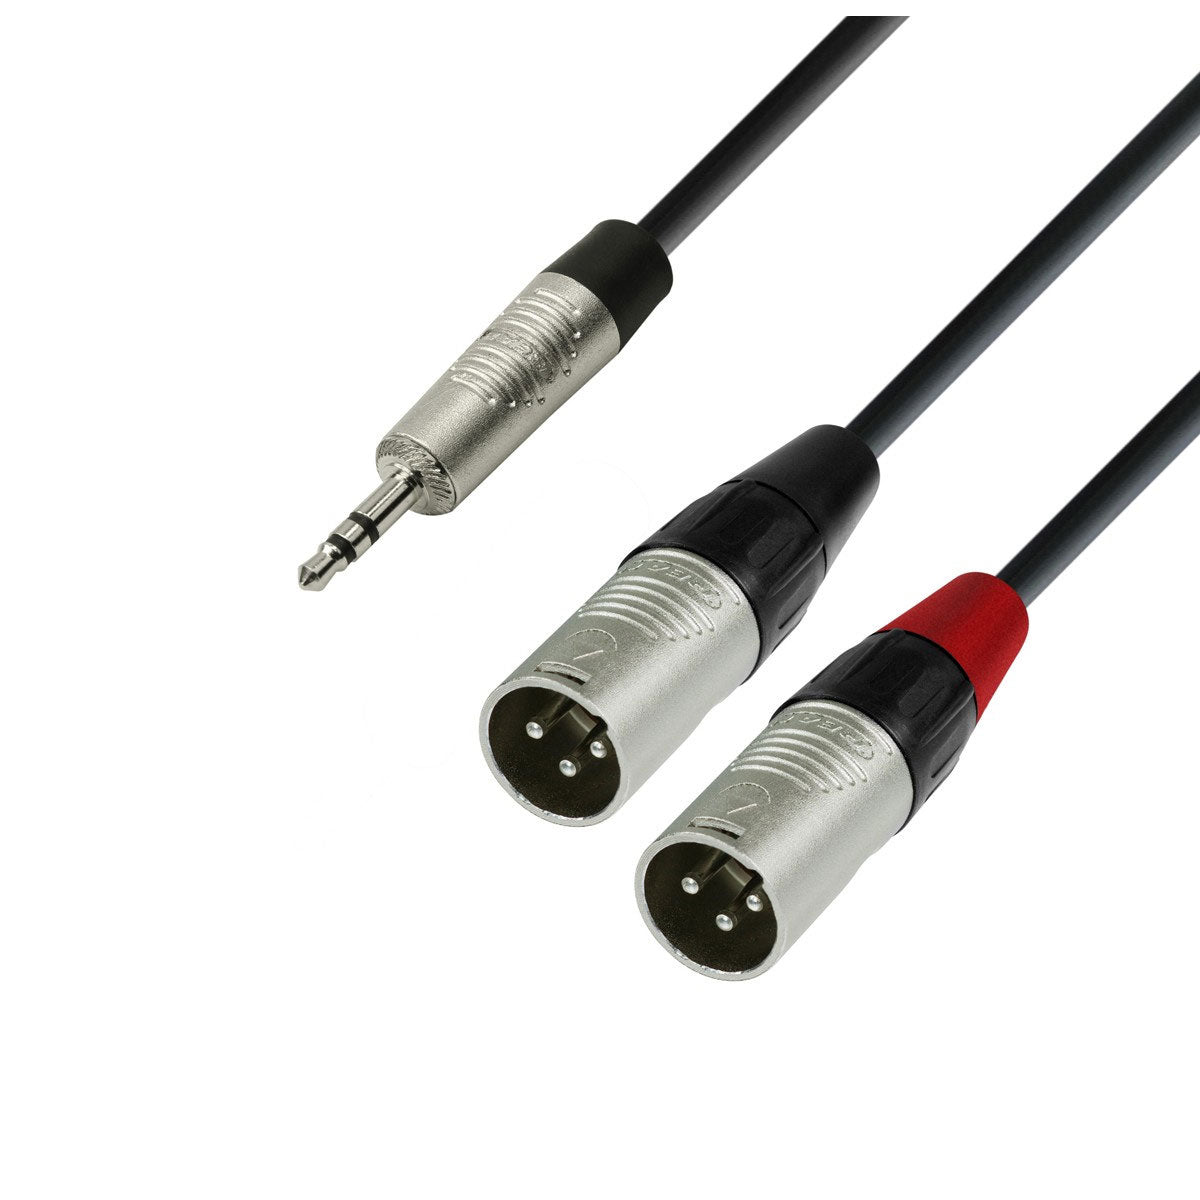 Adam Hall Cables K4 YWMM 0180 - Audio Cable REAN 3.5mm Jack stereo to 2 x XLR M 1.8m